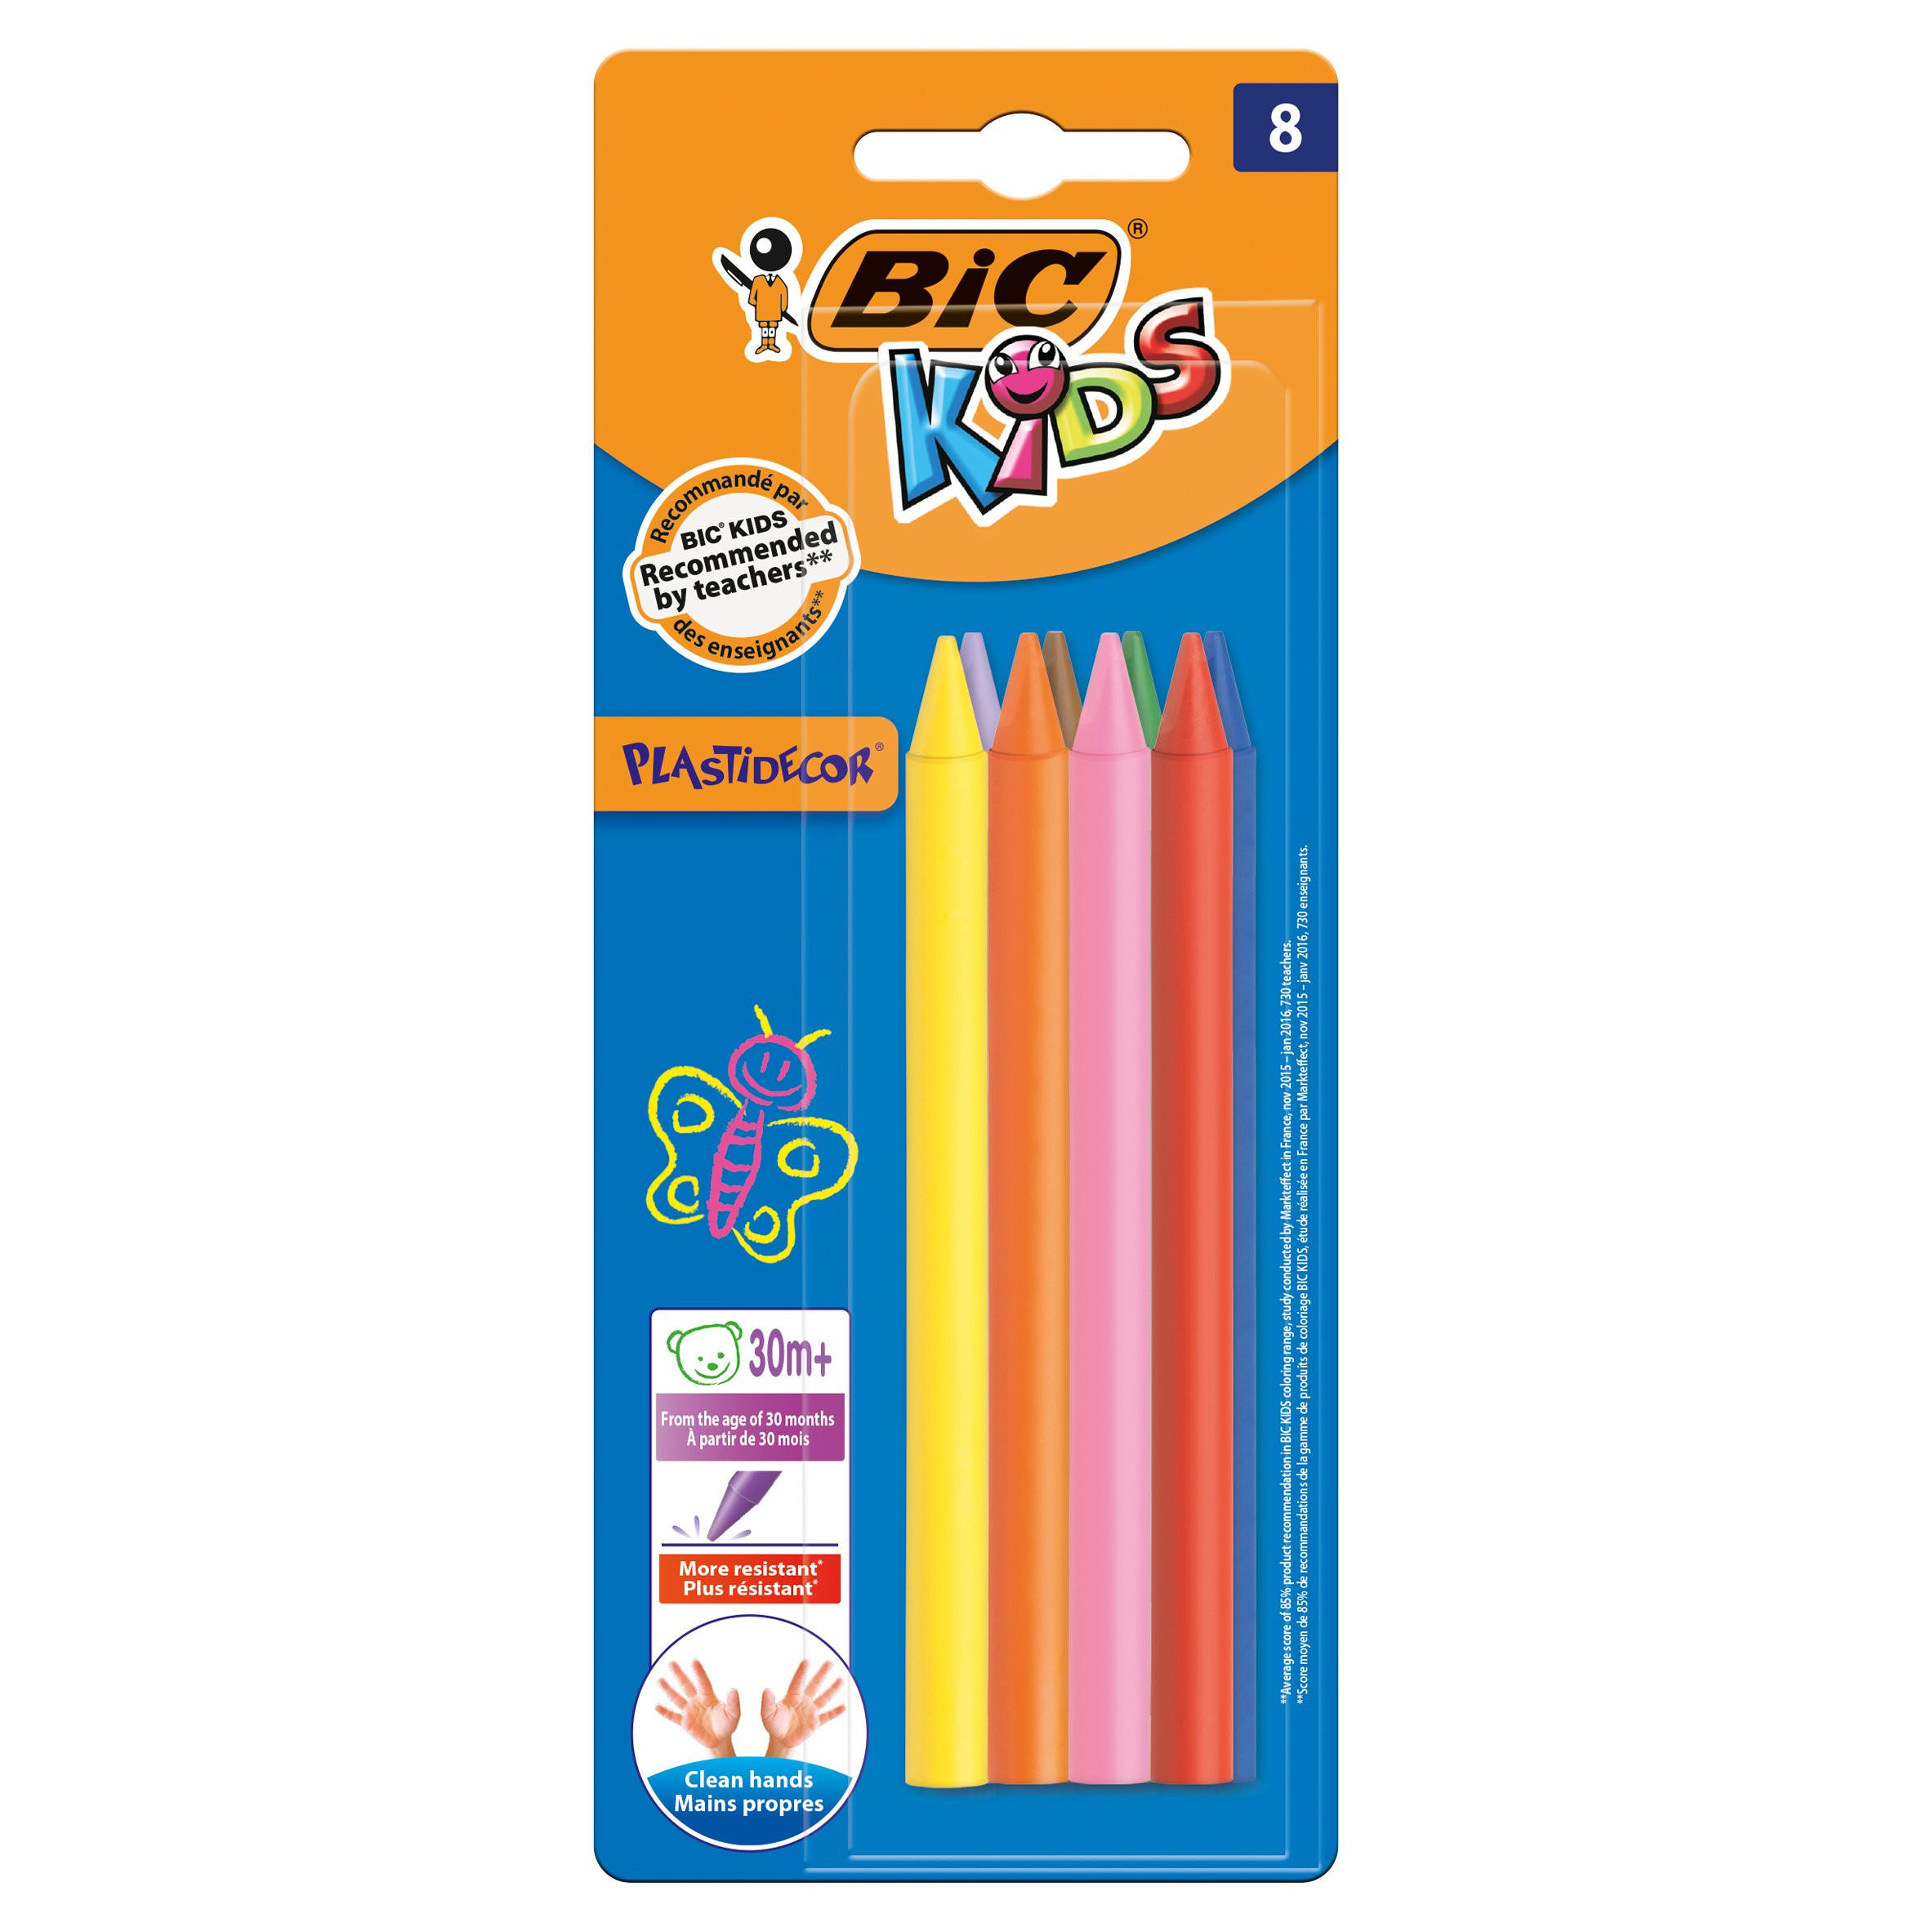 Bic Kids Plastidecor Coloured Crayons Assorted Pack of 24 - Hunt Office  Ireland